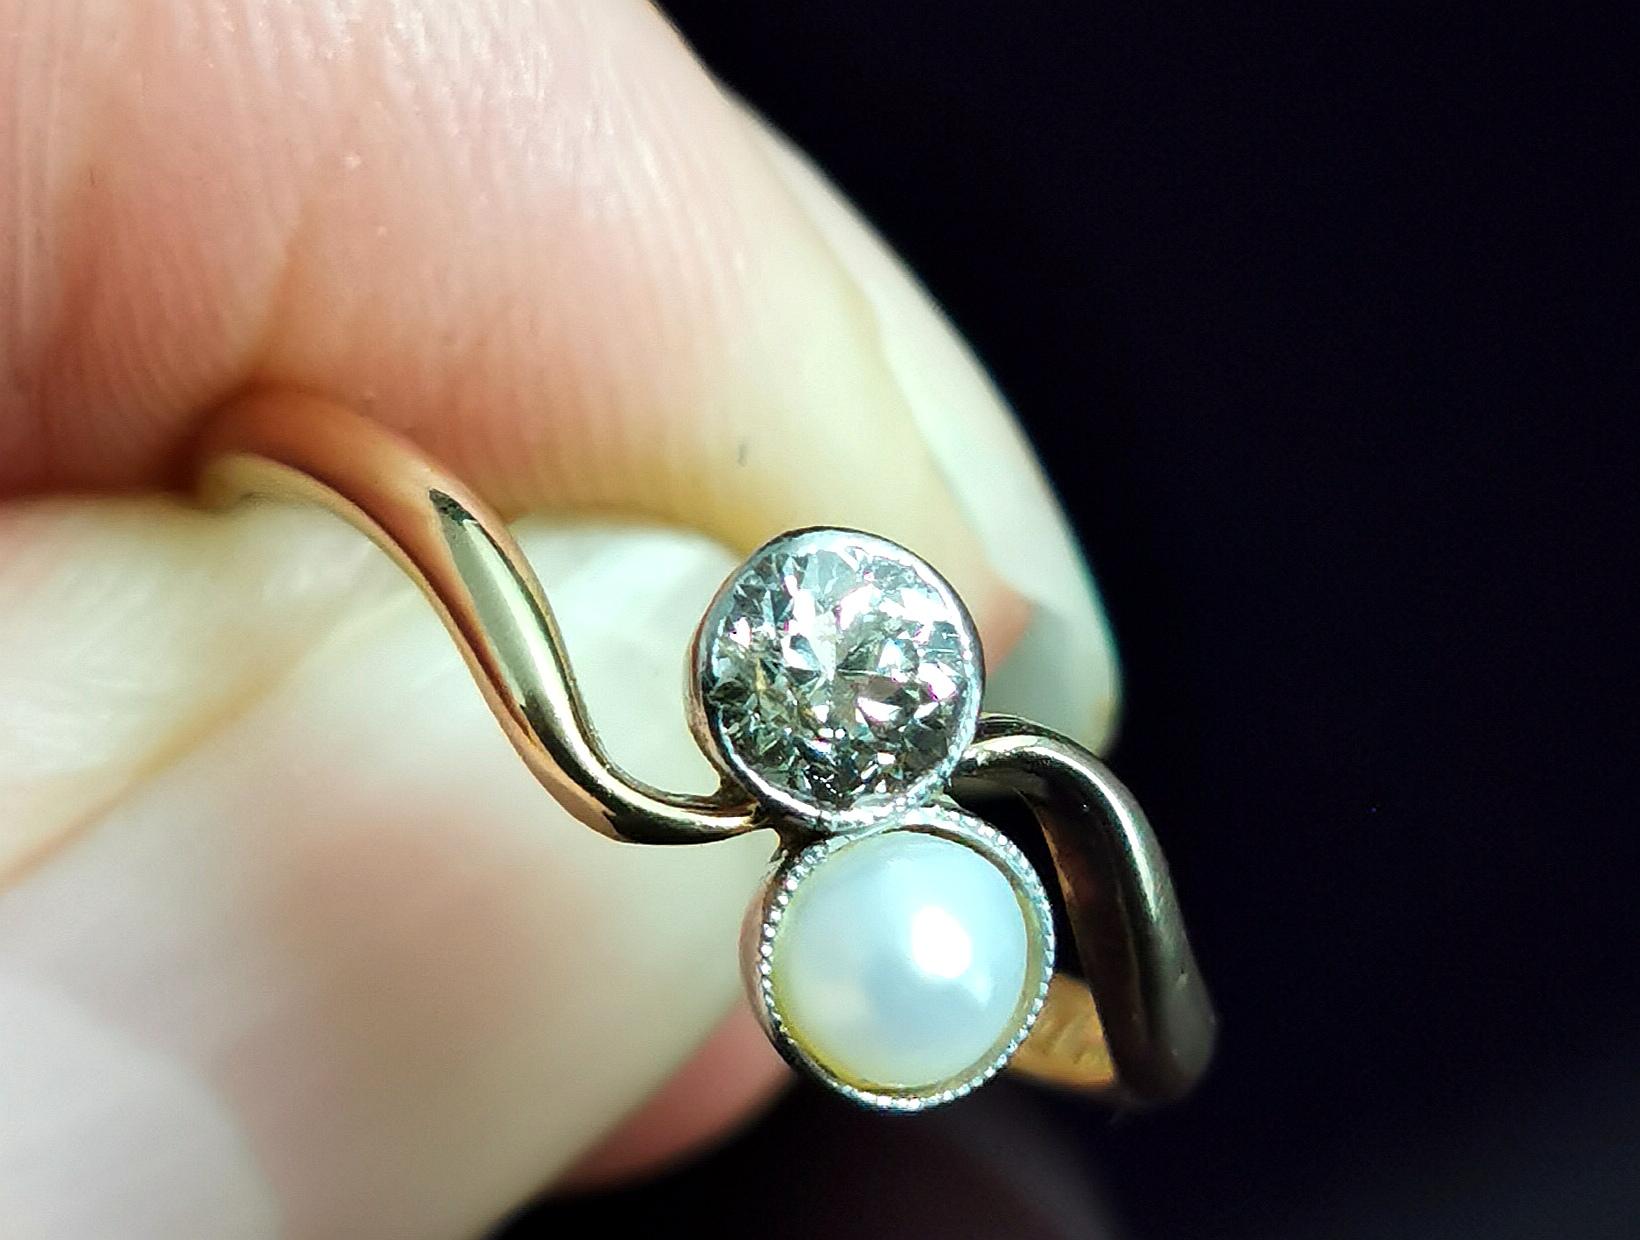 Women's Antique Diamond and Pearl Crossover Ring, 18k Gold, Toi Et Moi